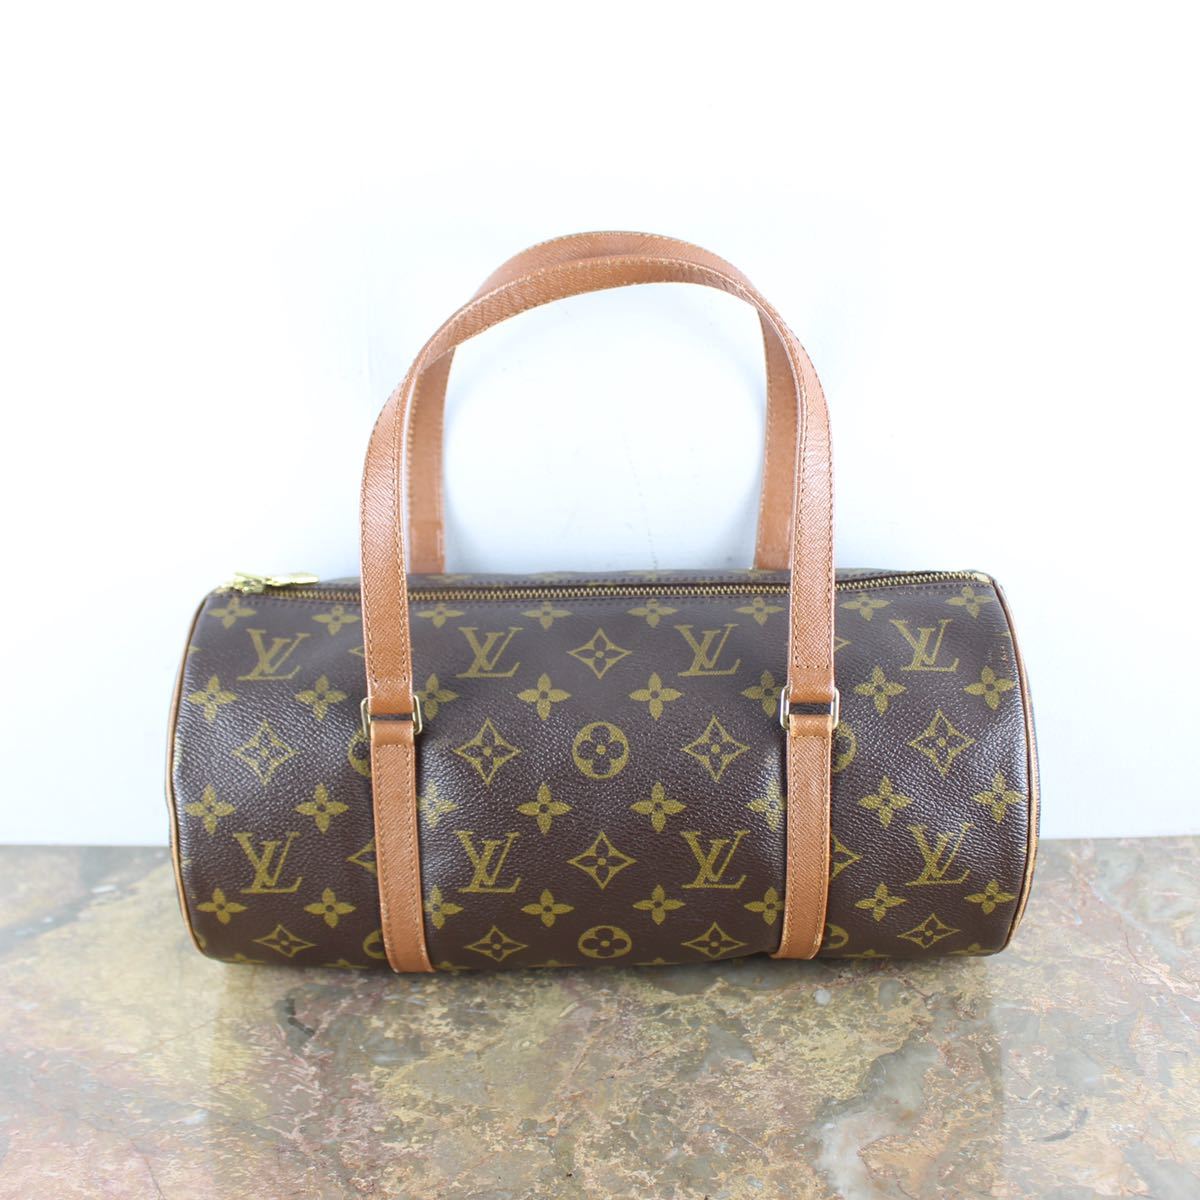 LOUIS VUITTON M51366 NO1924 MONOGRAM PATTERNED HAND BAG MADE IN